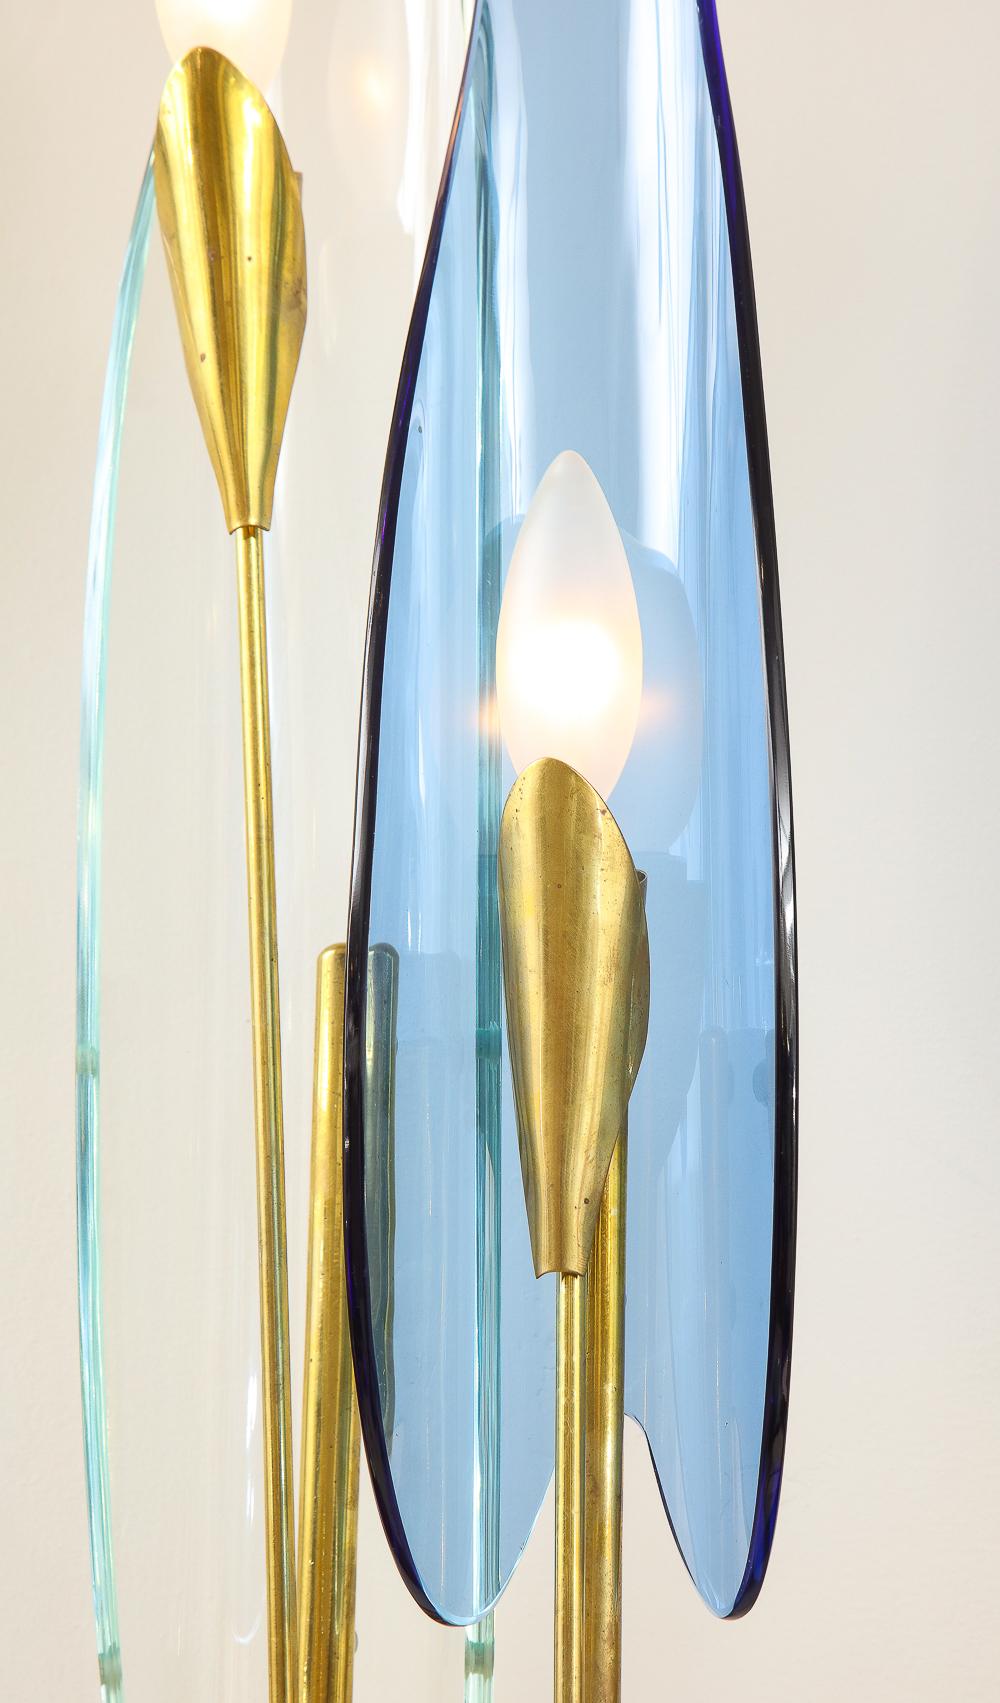 Brass, glass. Sculptural structures with alternating clear and blue colored glass 